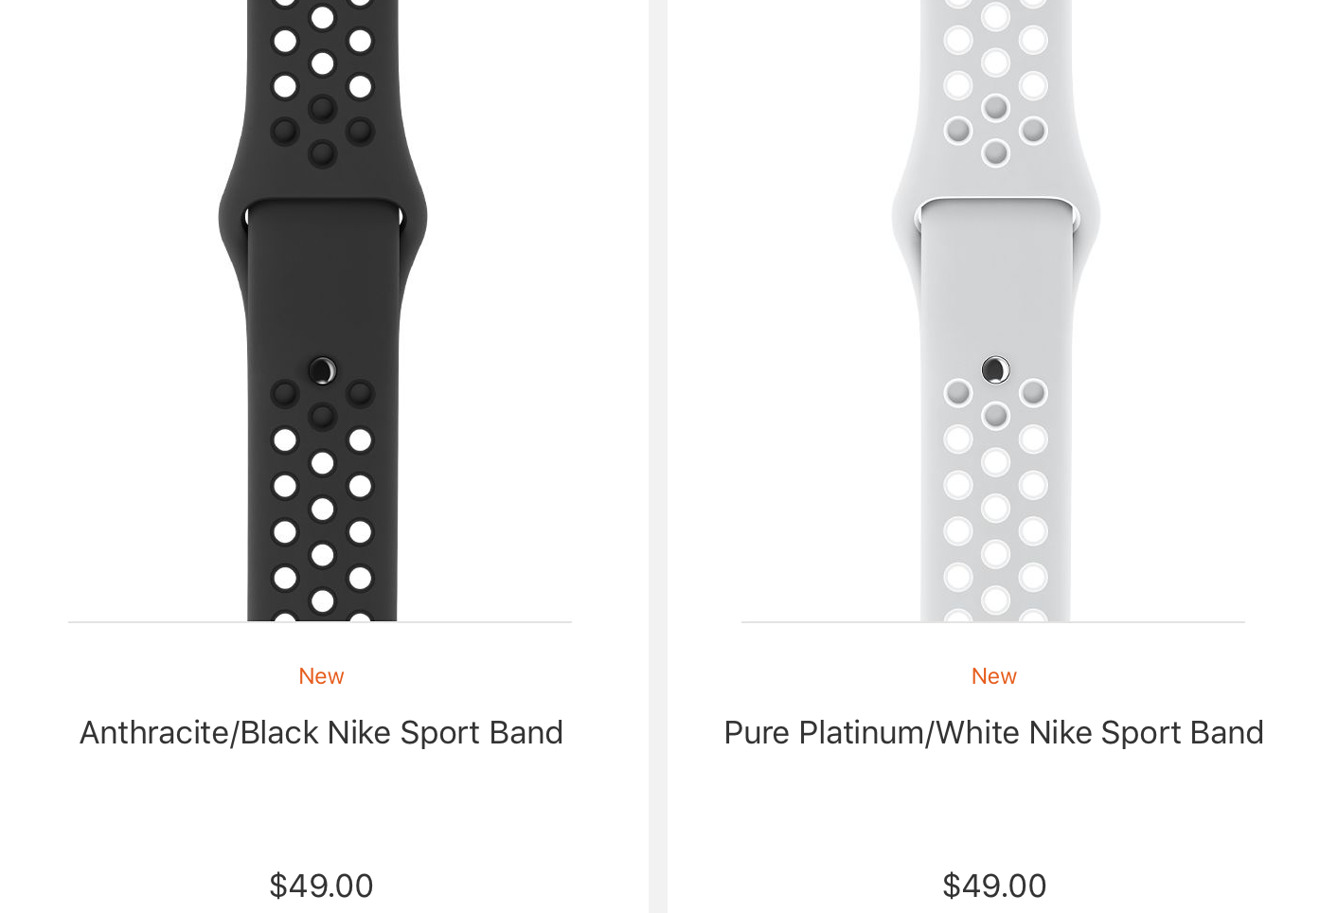 Apple Watch Nike Sport band sold separately for $49, new spring lineup | AppleInsider